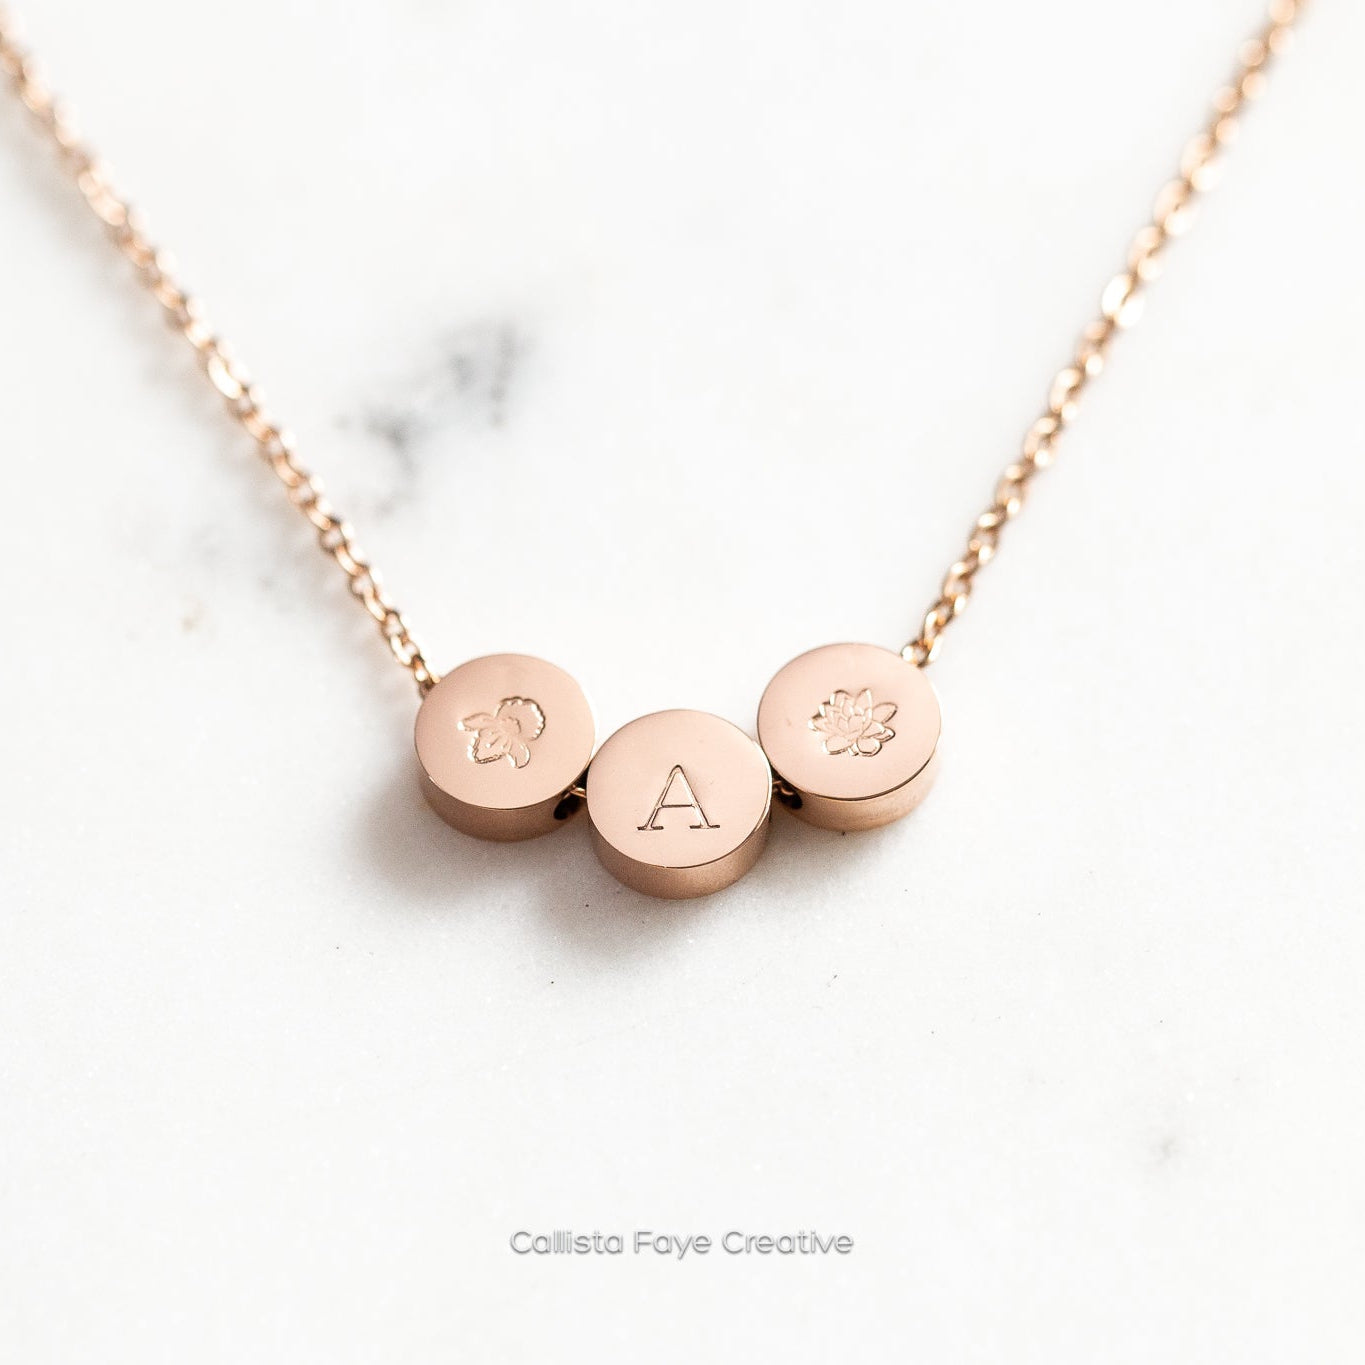 Custom Initial, Birth Flower Mini Coin Bead Necklace, Personalized Necklaces callistafaye 3 Beads Rose Gold 